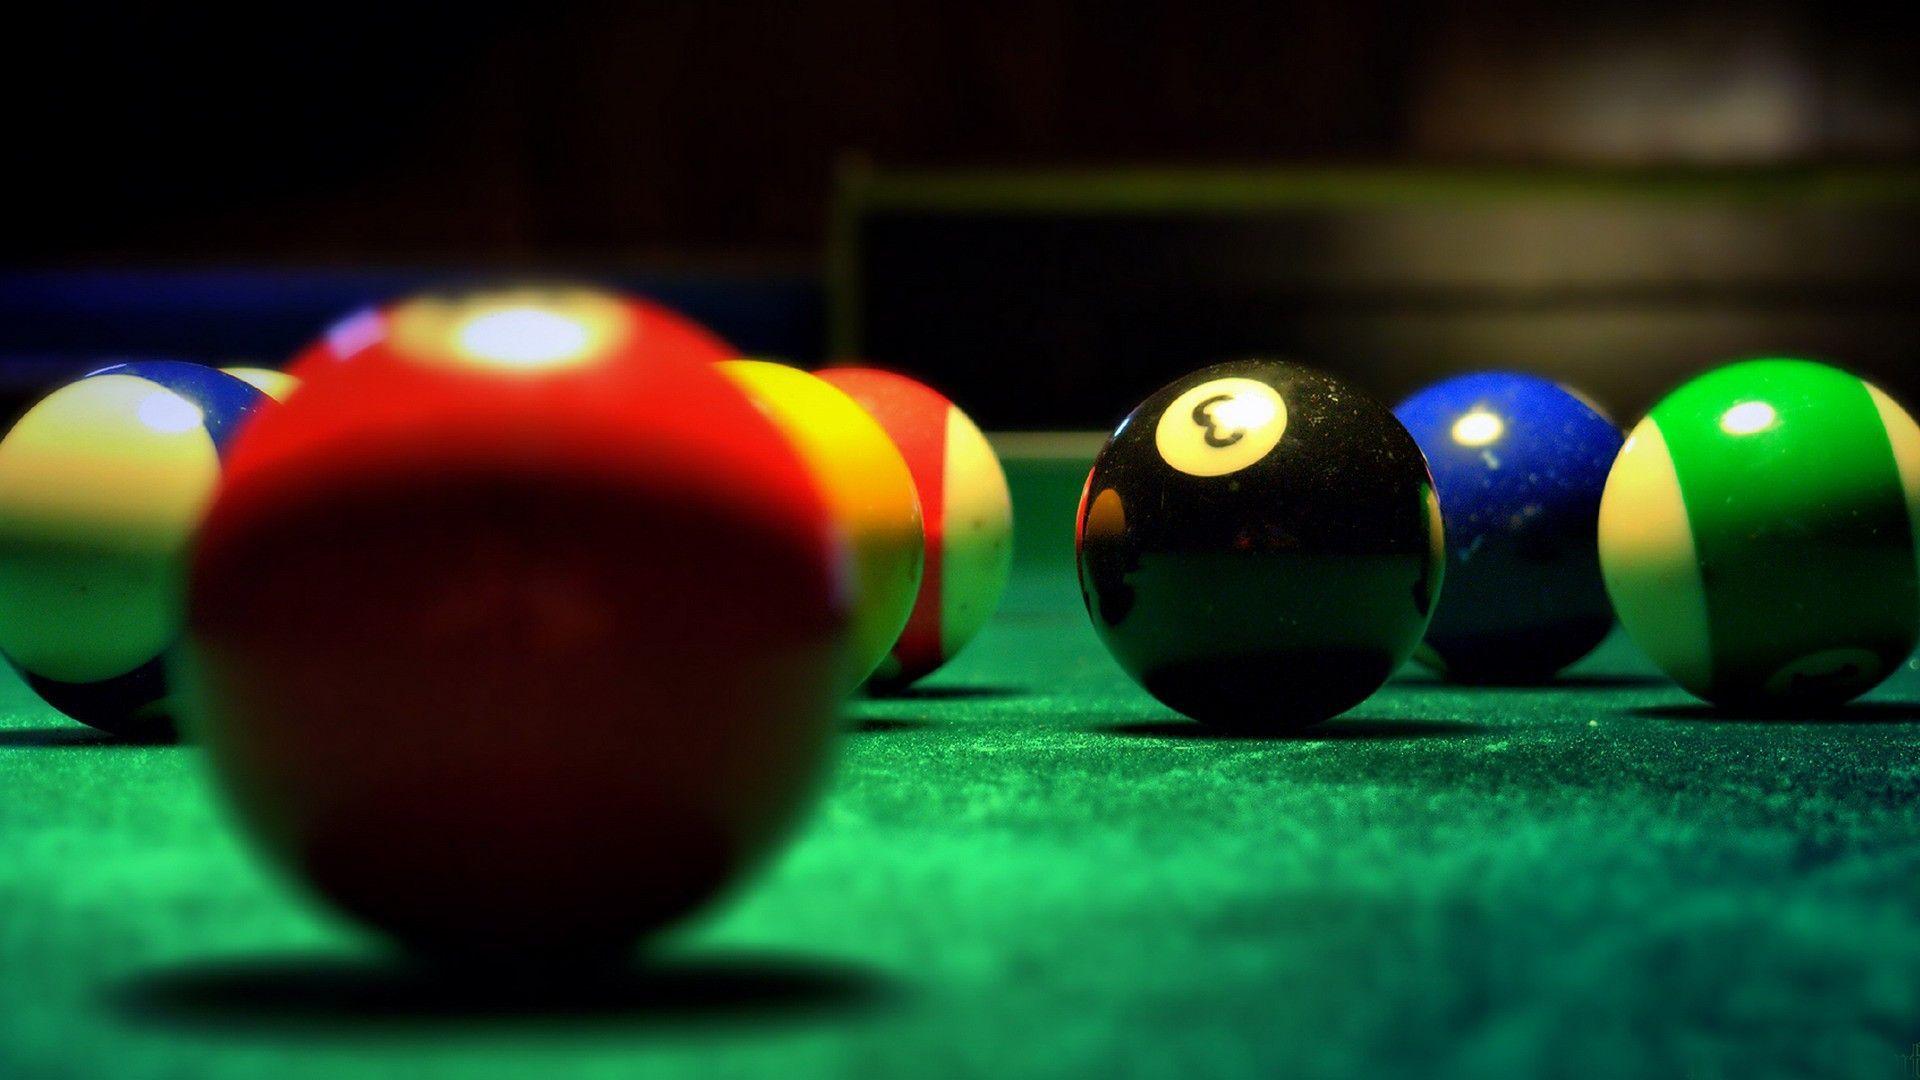 Picture of pool balls. The picture focuses on the black 8 ball